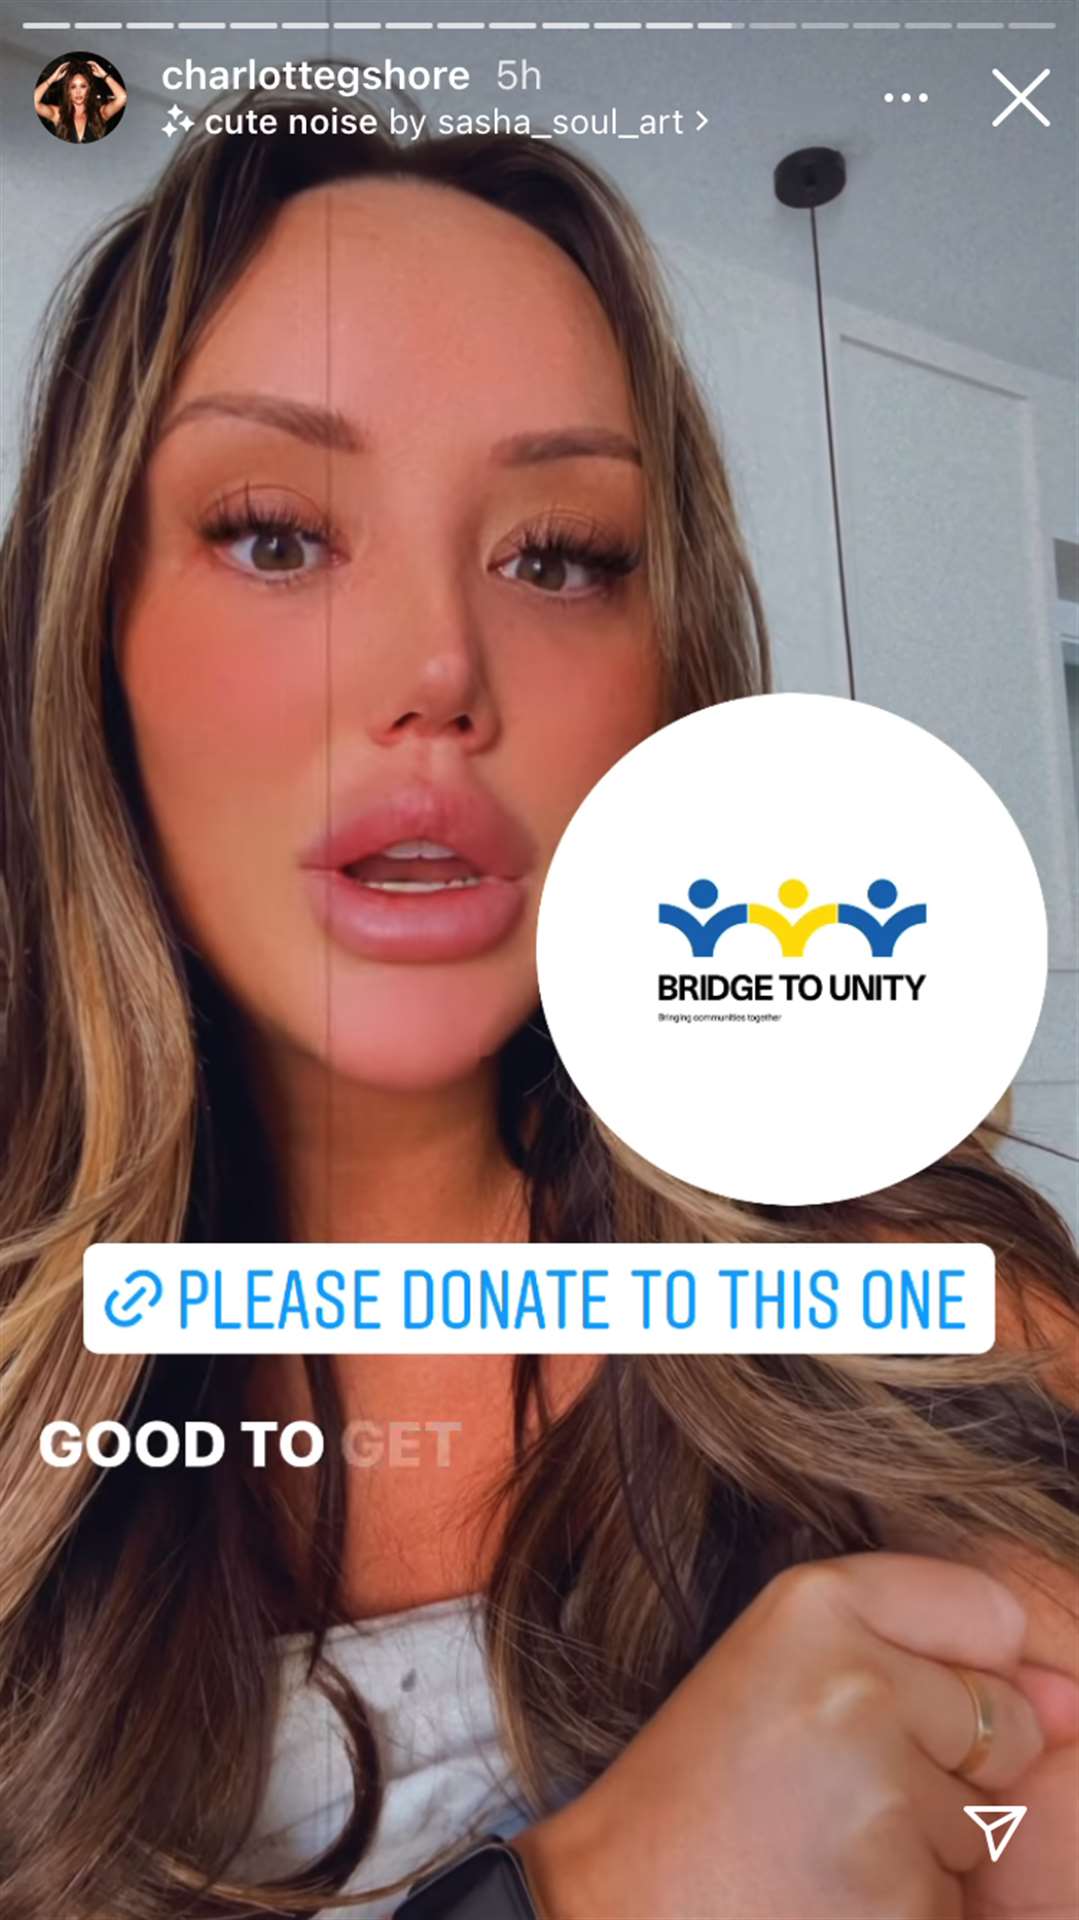 Charlotte Crosby’s story from March 1 which mentioned Bridge to Unity’s fundraiser (@charlottegshore/PA)